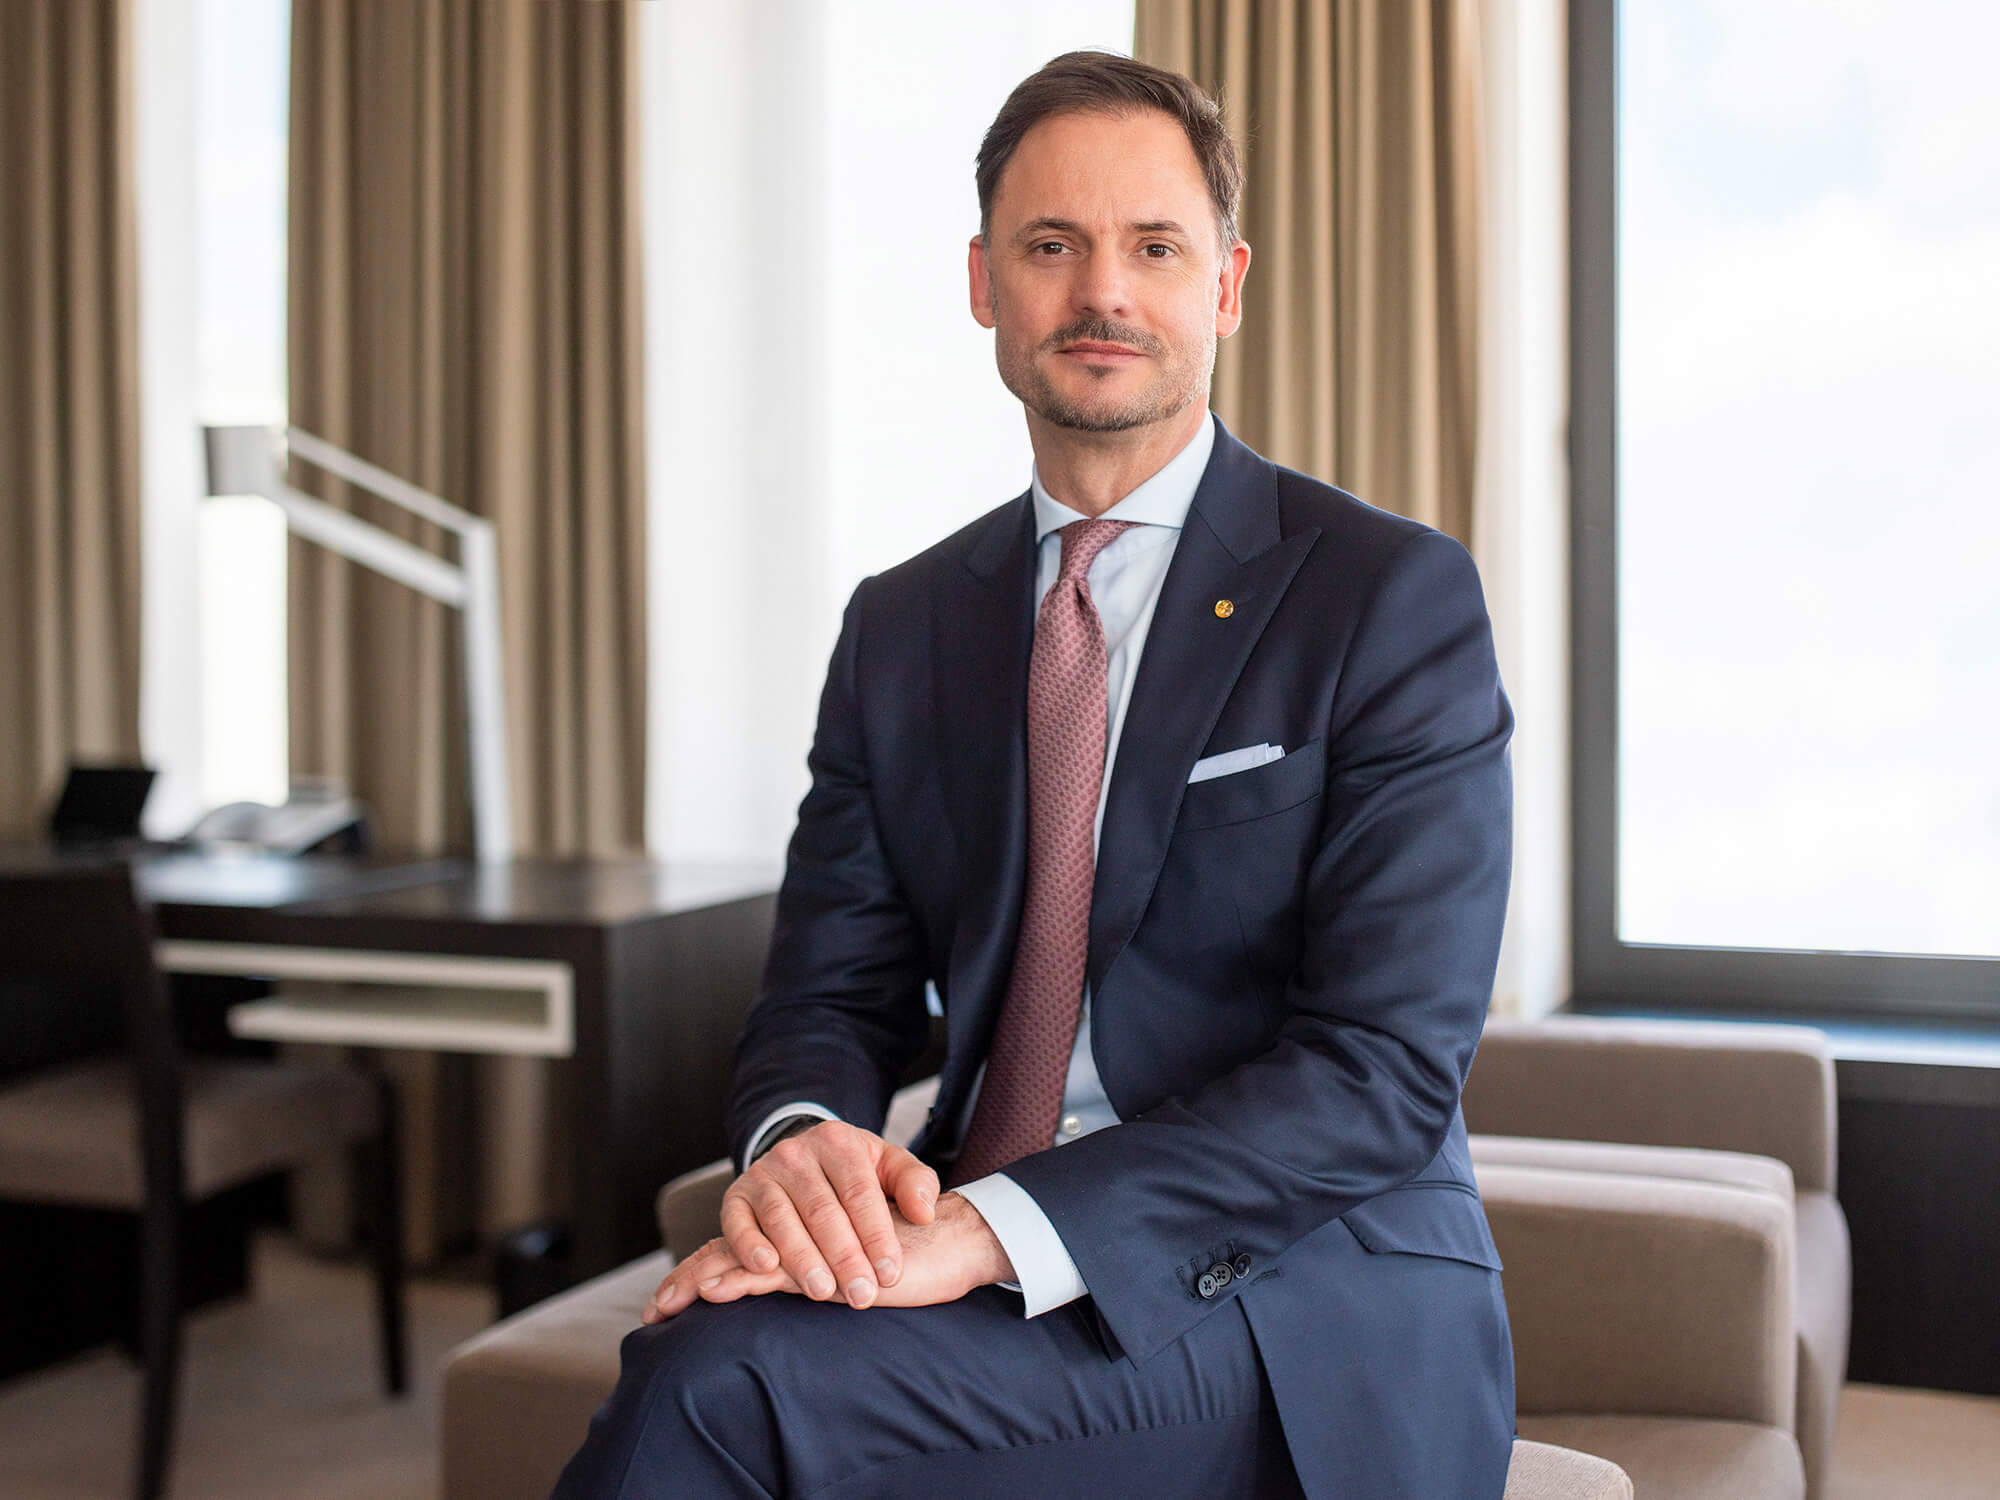 Gordon A. Debus ist Area General Manager der Hommage Luxury Hotels Collection